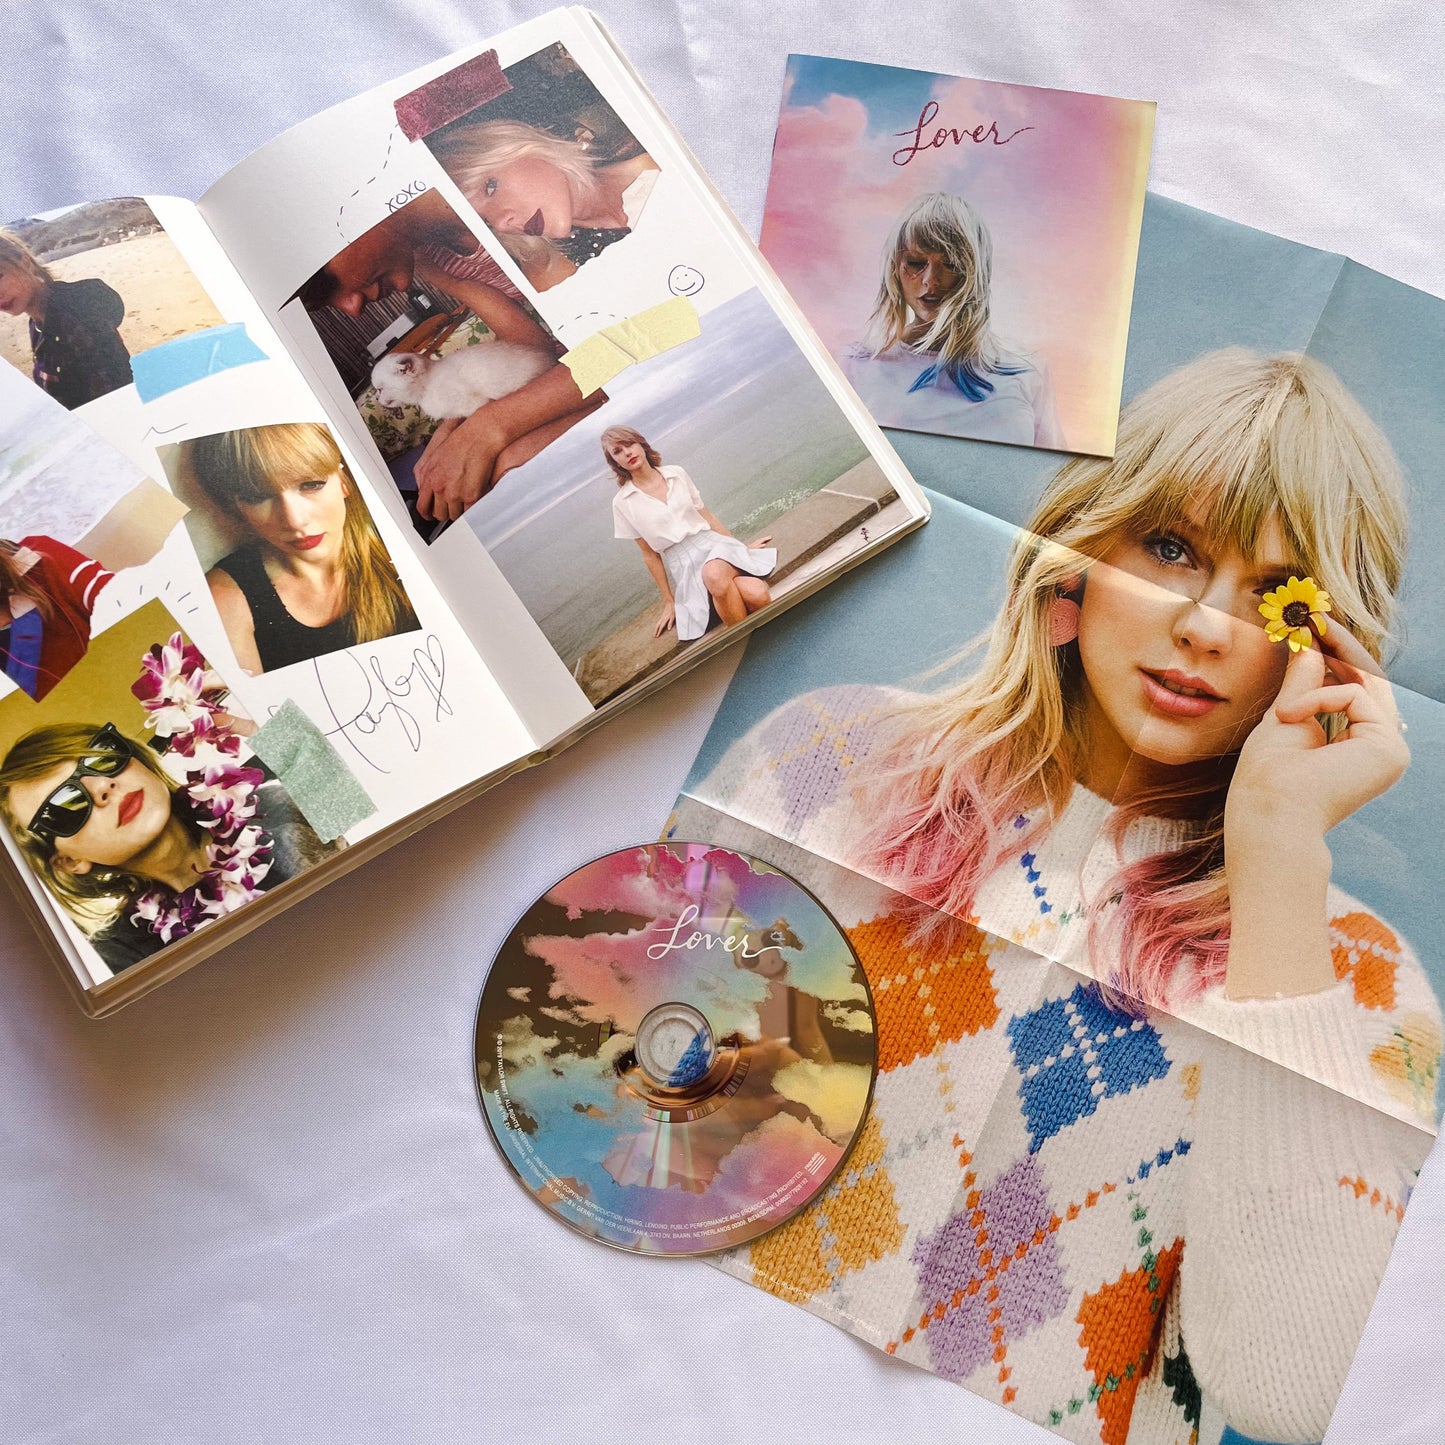 Taylor Swift - Lover (Deluxe) Version 2